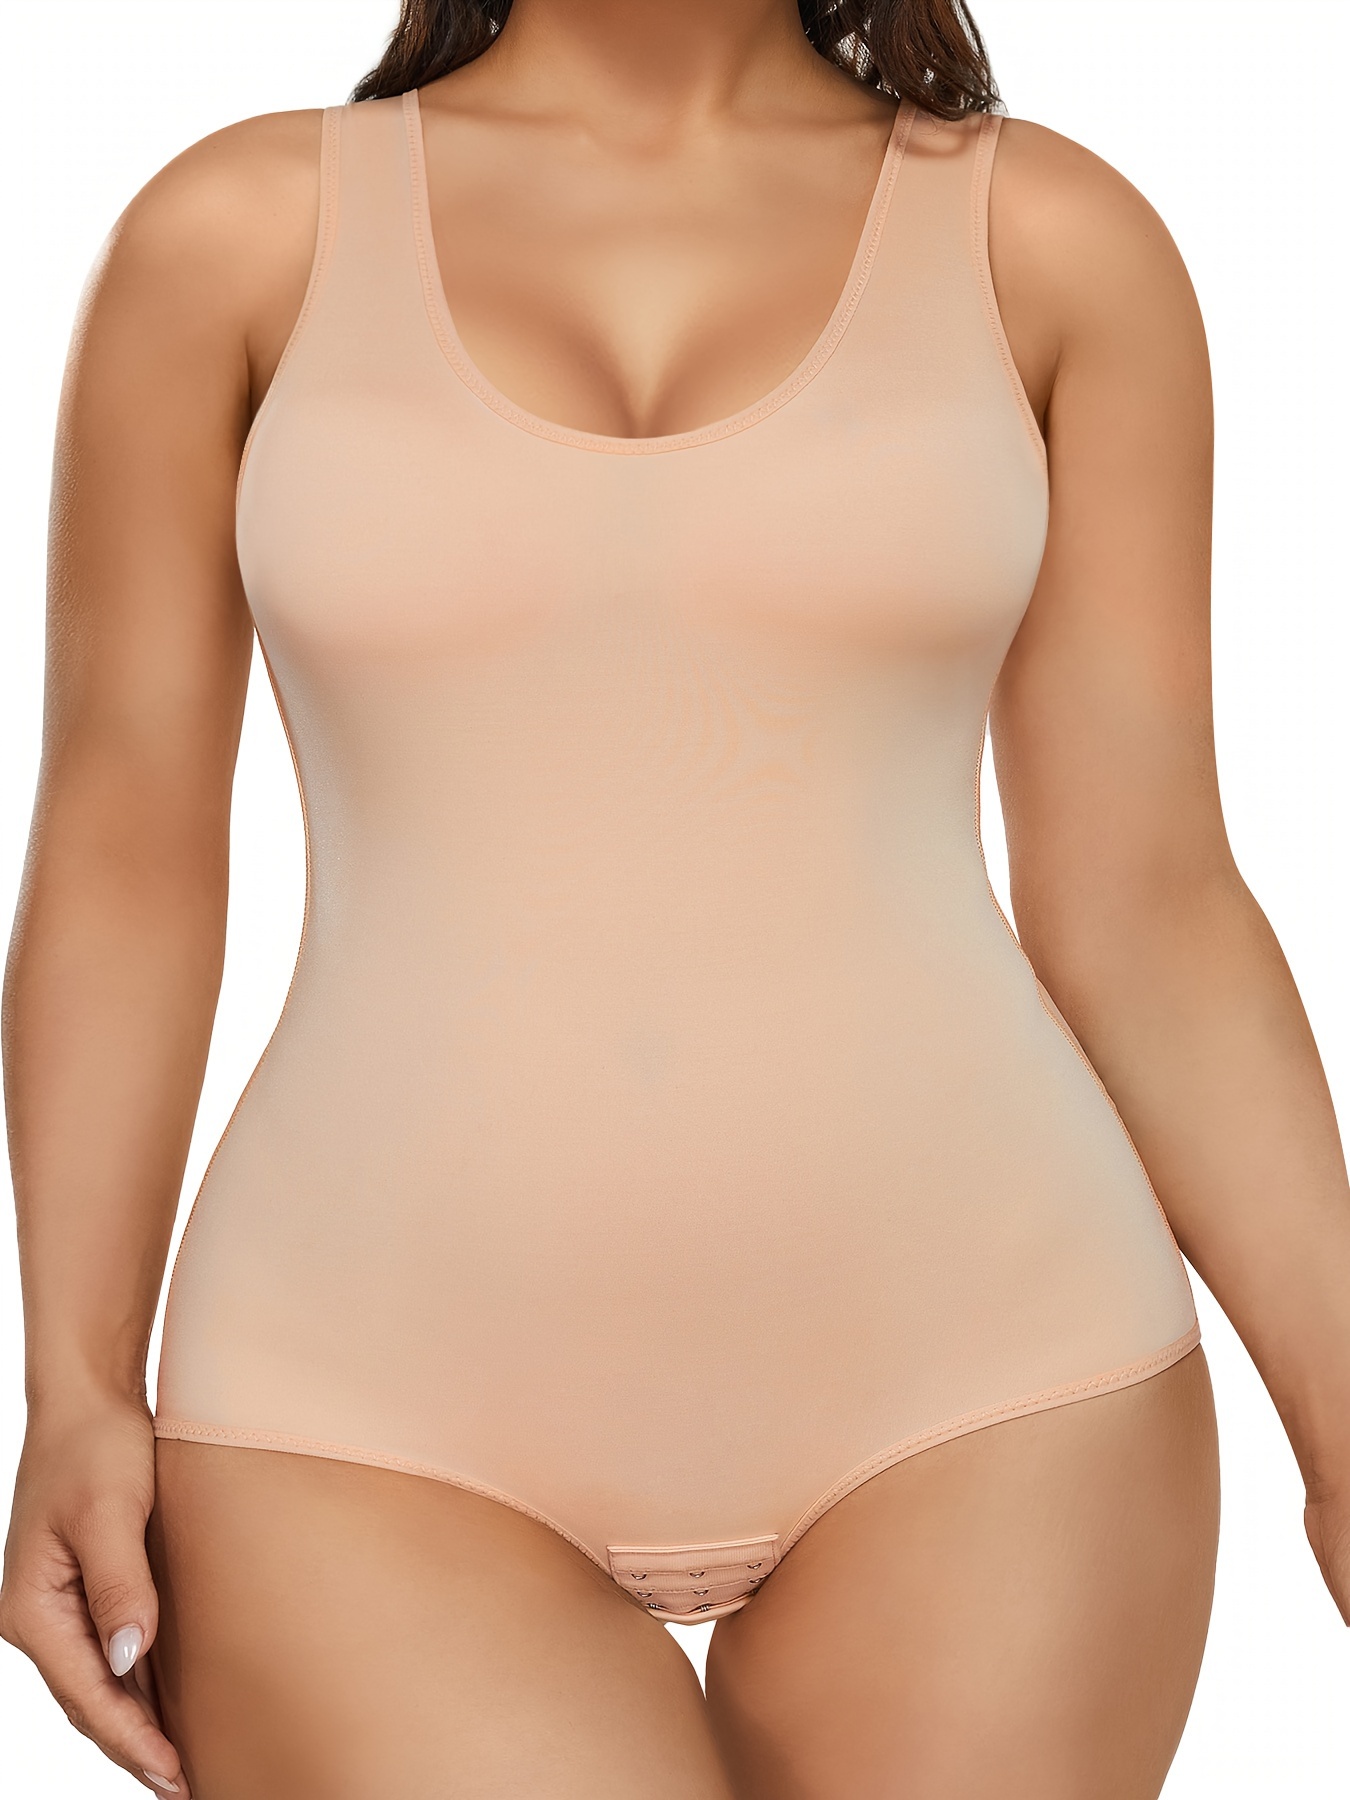 Plus Size Sexy Shapewear, Women's Plus Breathable Tummy Control Padded  Invisible Hook & Eye Crotch Design Underdress Shaping Bodysuit